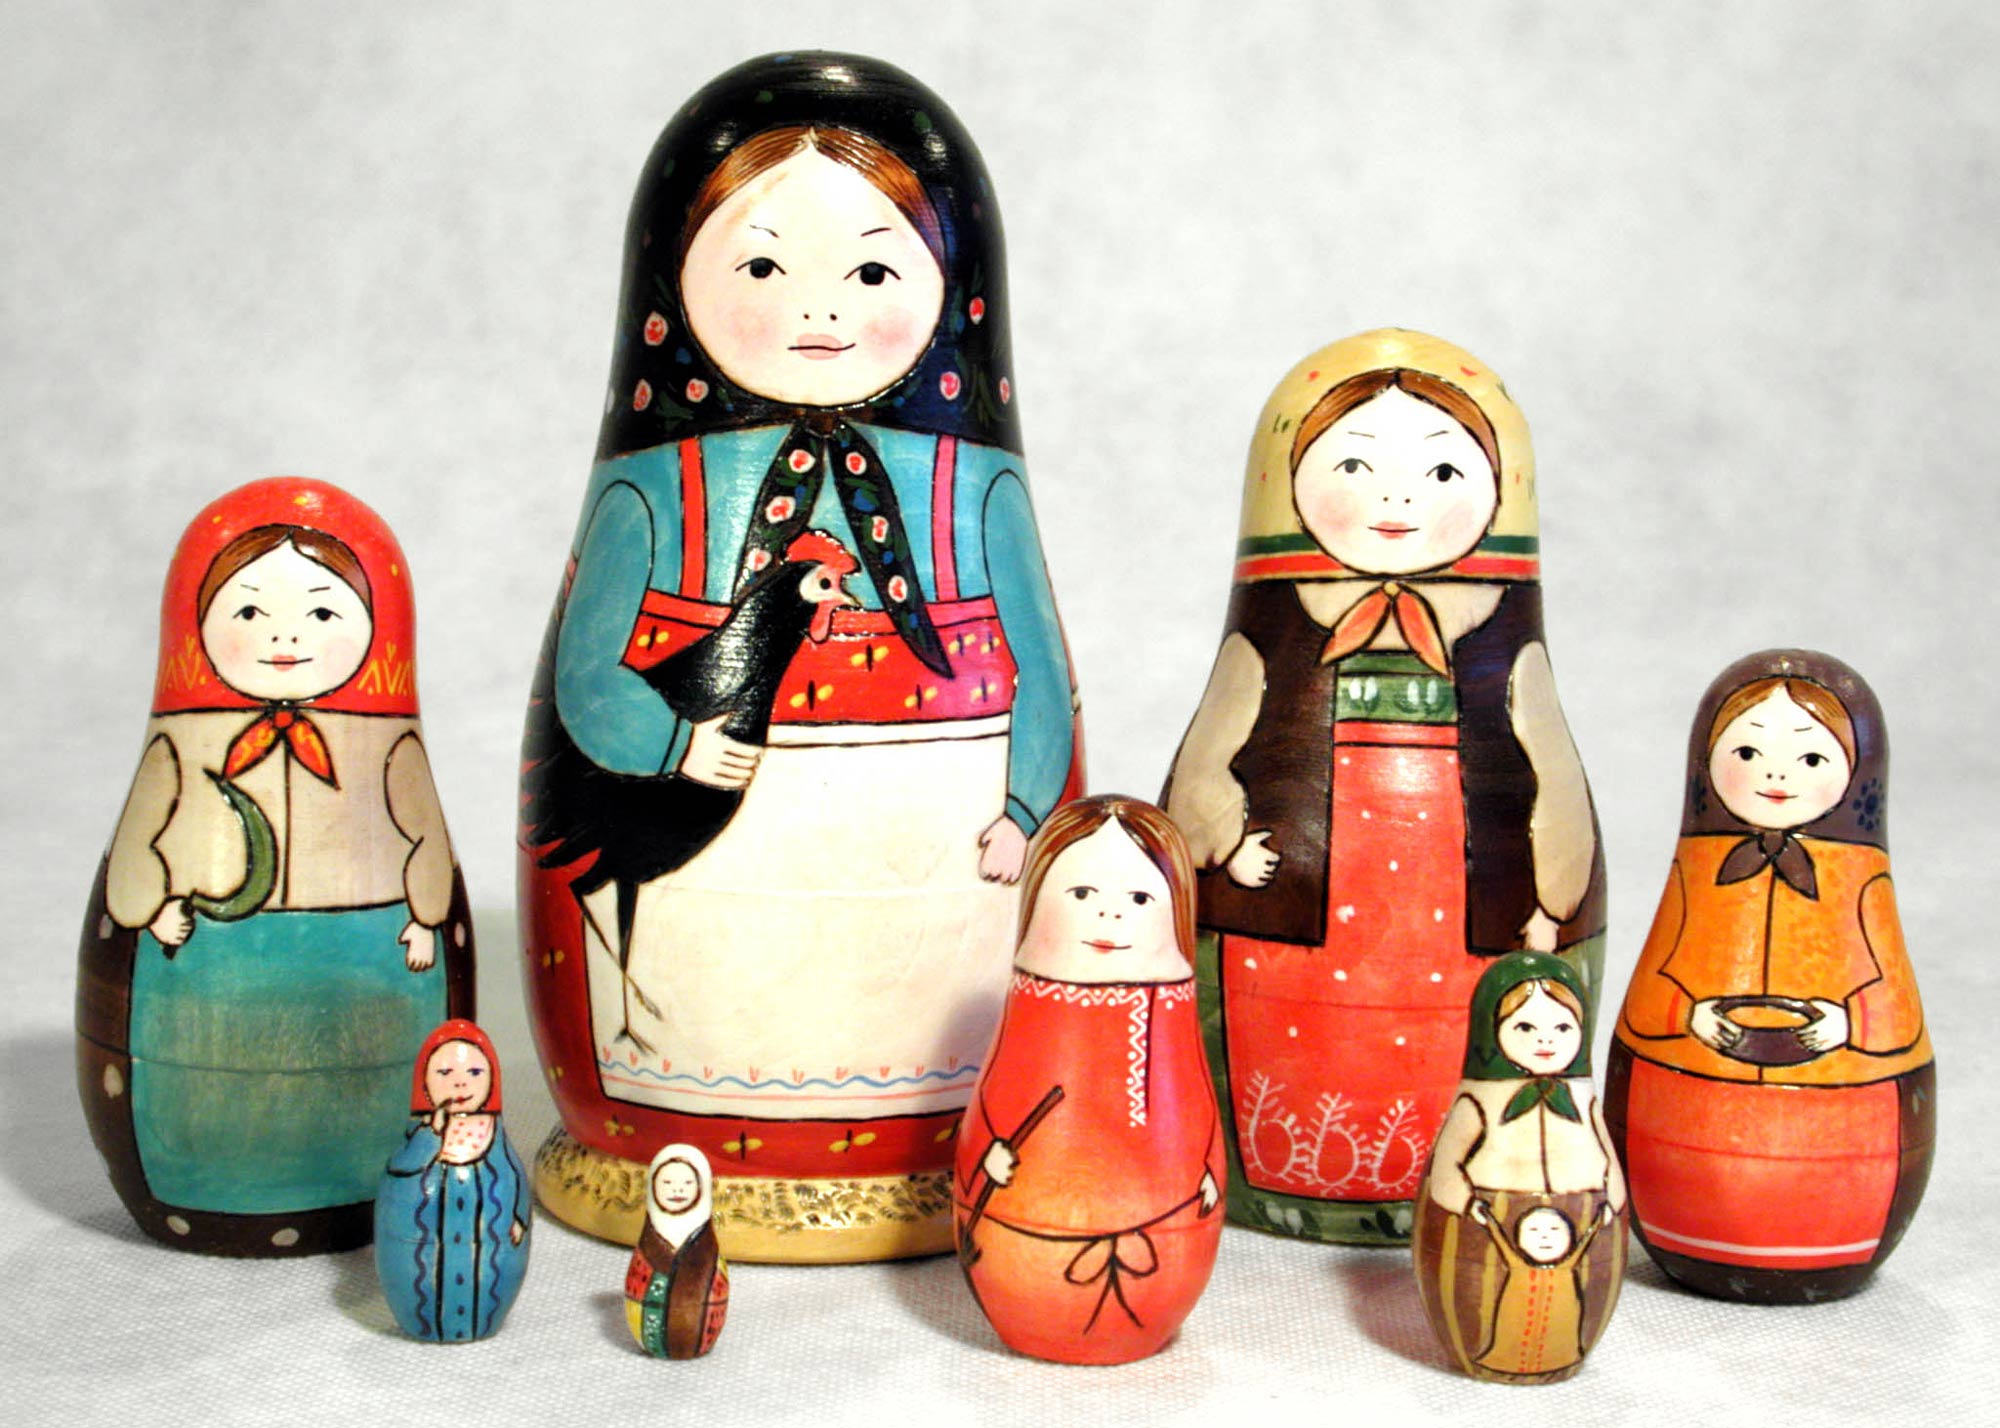 Buy Rooster Girl Doll - Reproduction of First Nesting Doll, 8pc./7" at GoldenCockerel.com